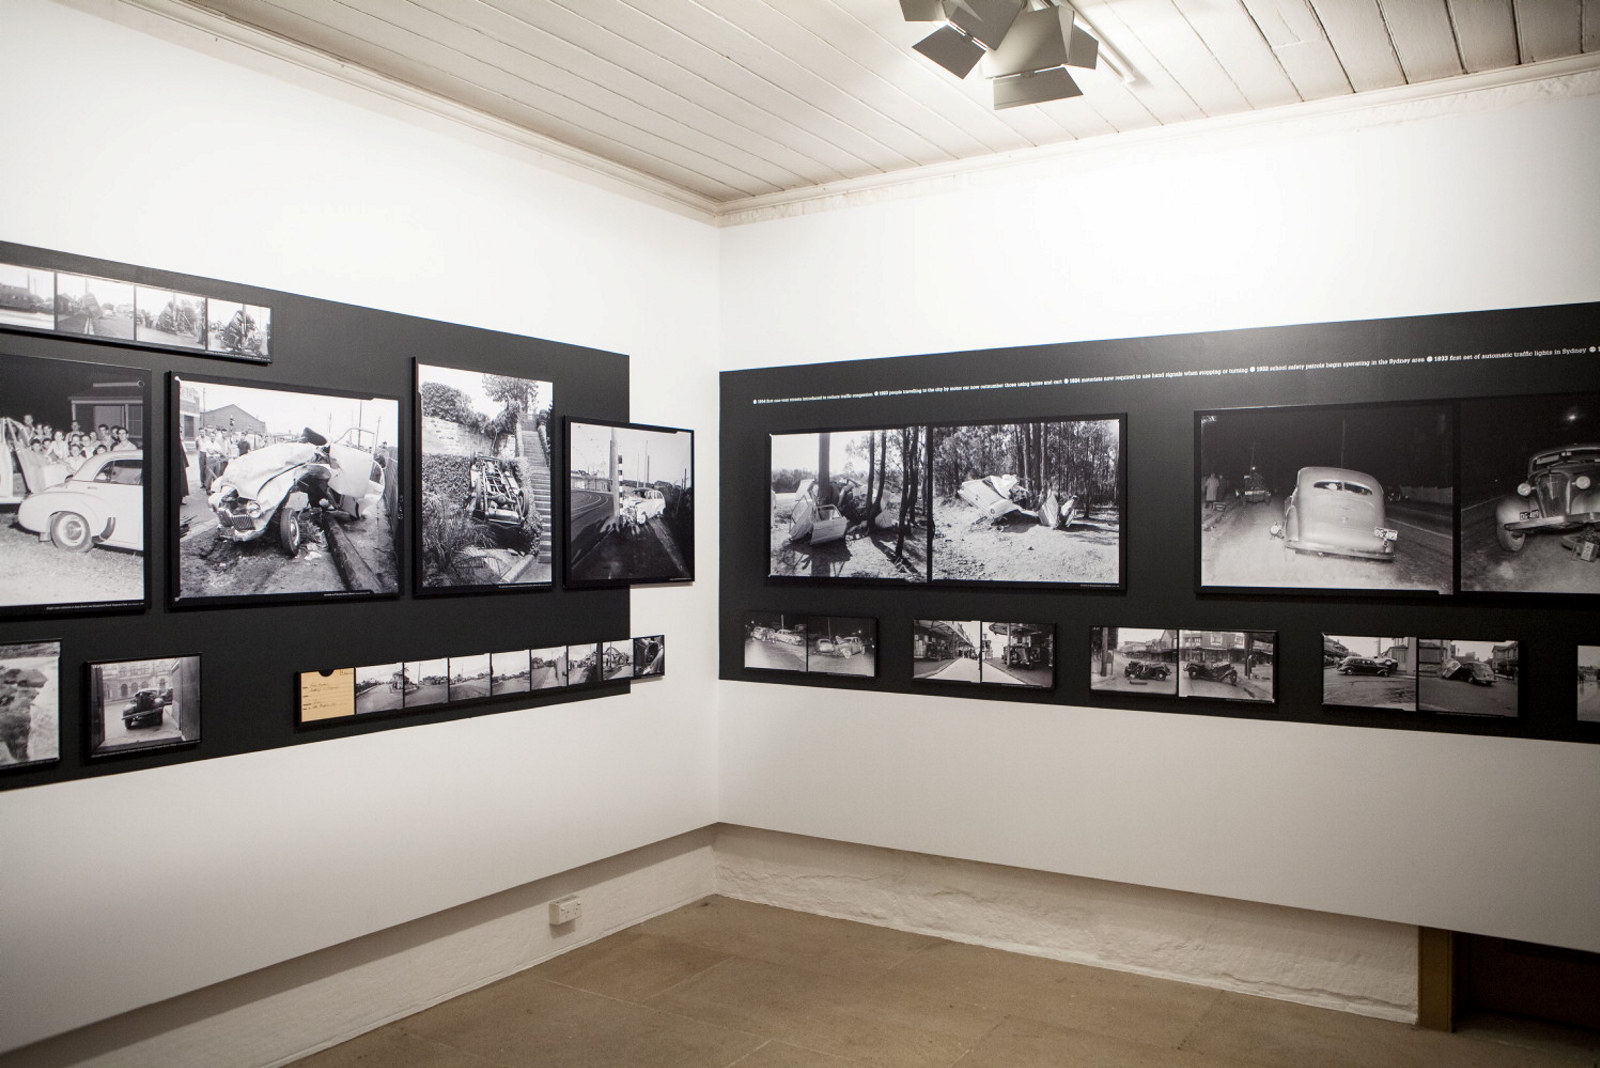 View of gallery space with black and white photographs mounted on white walls.